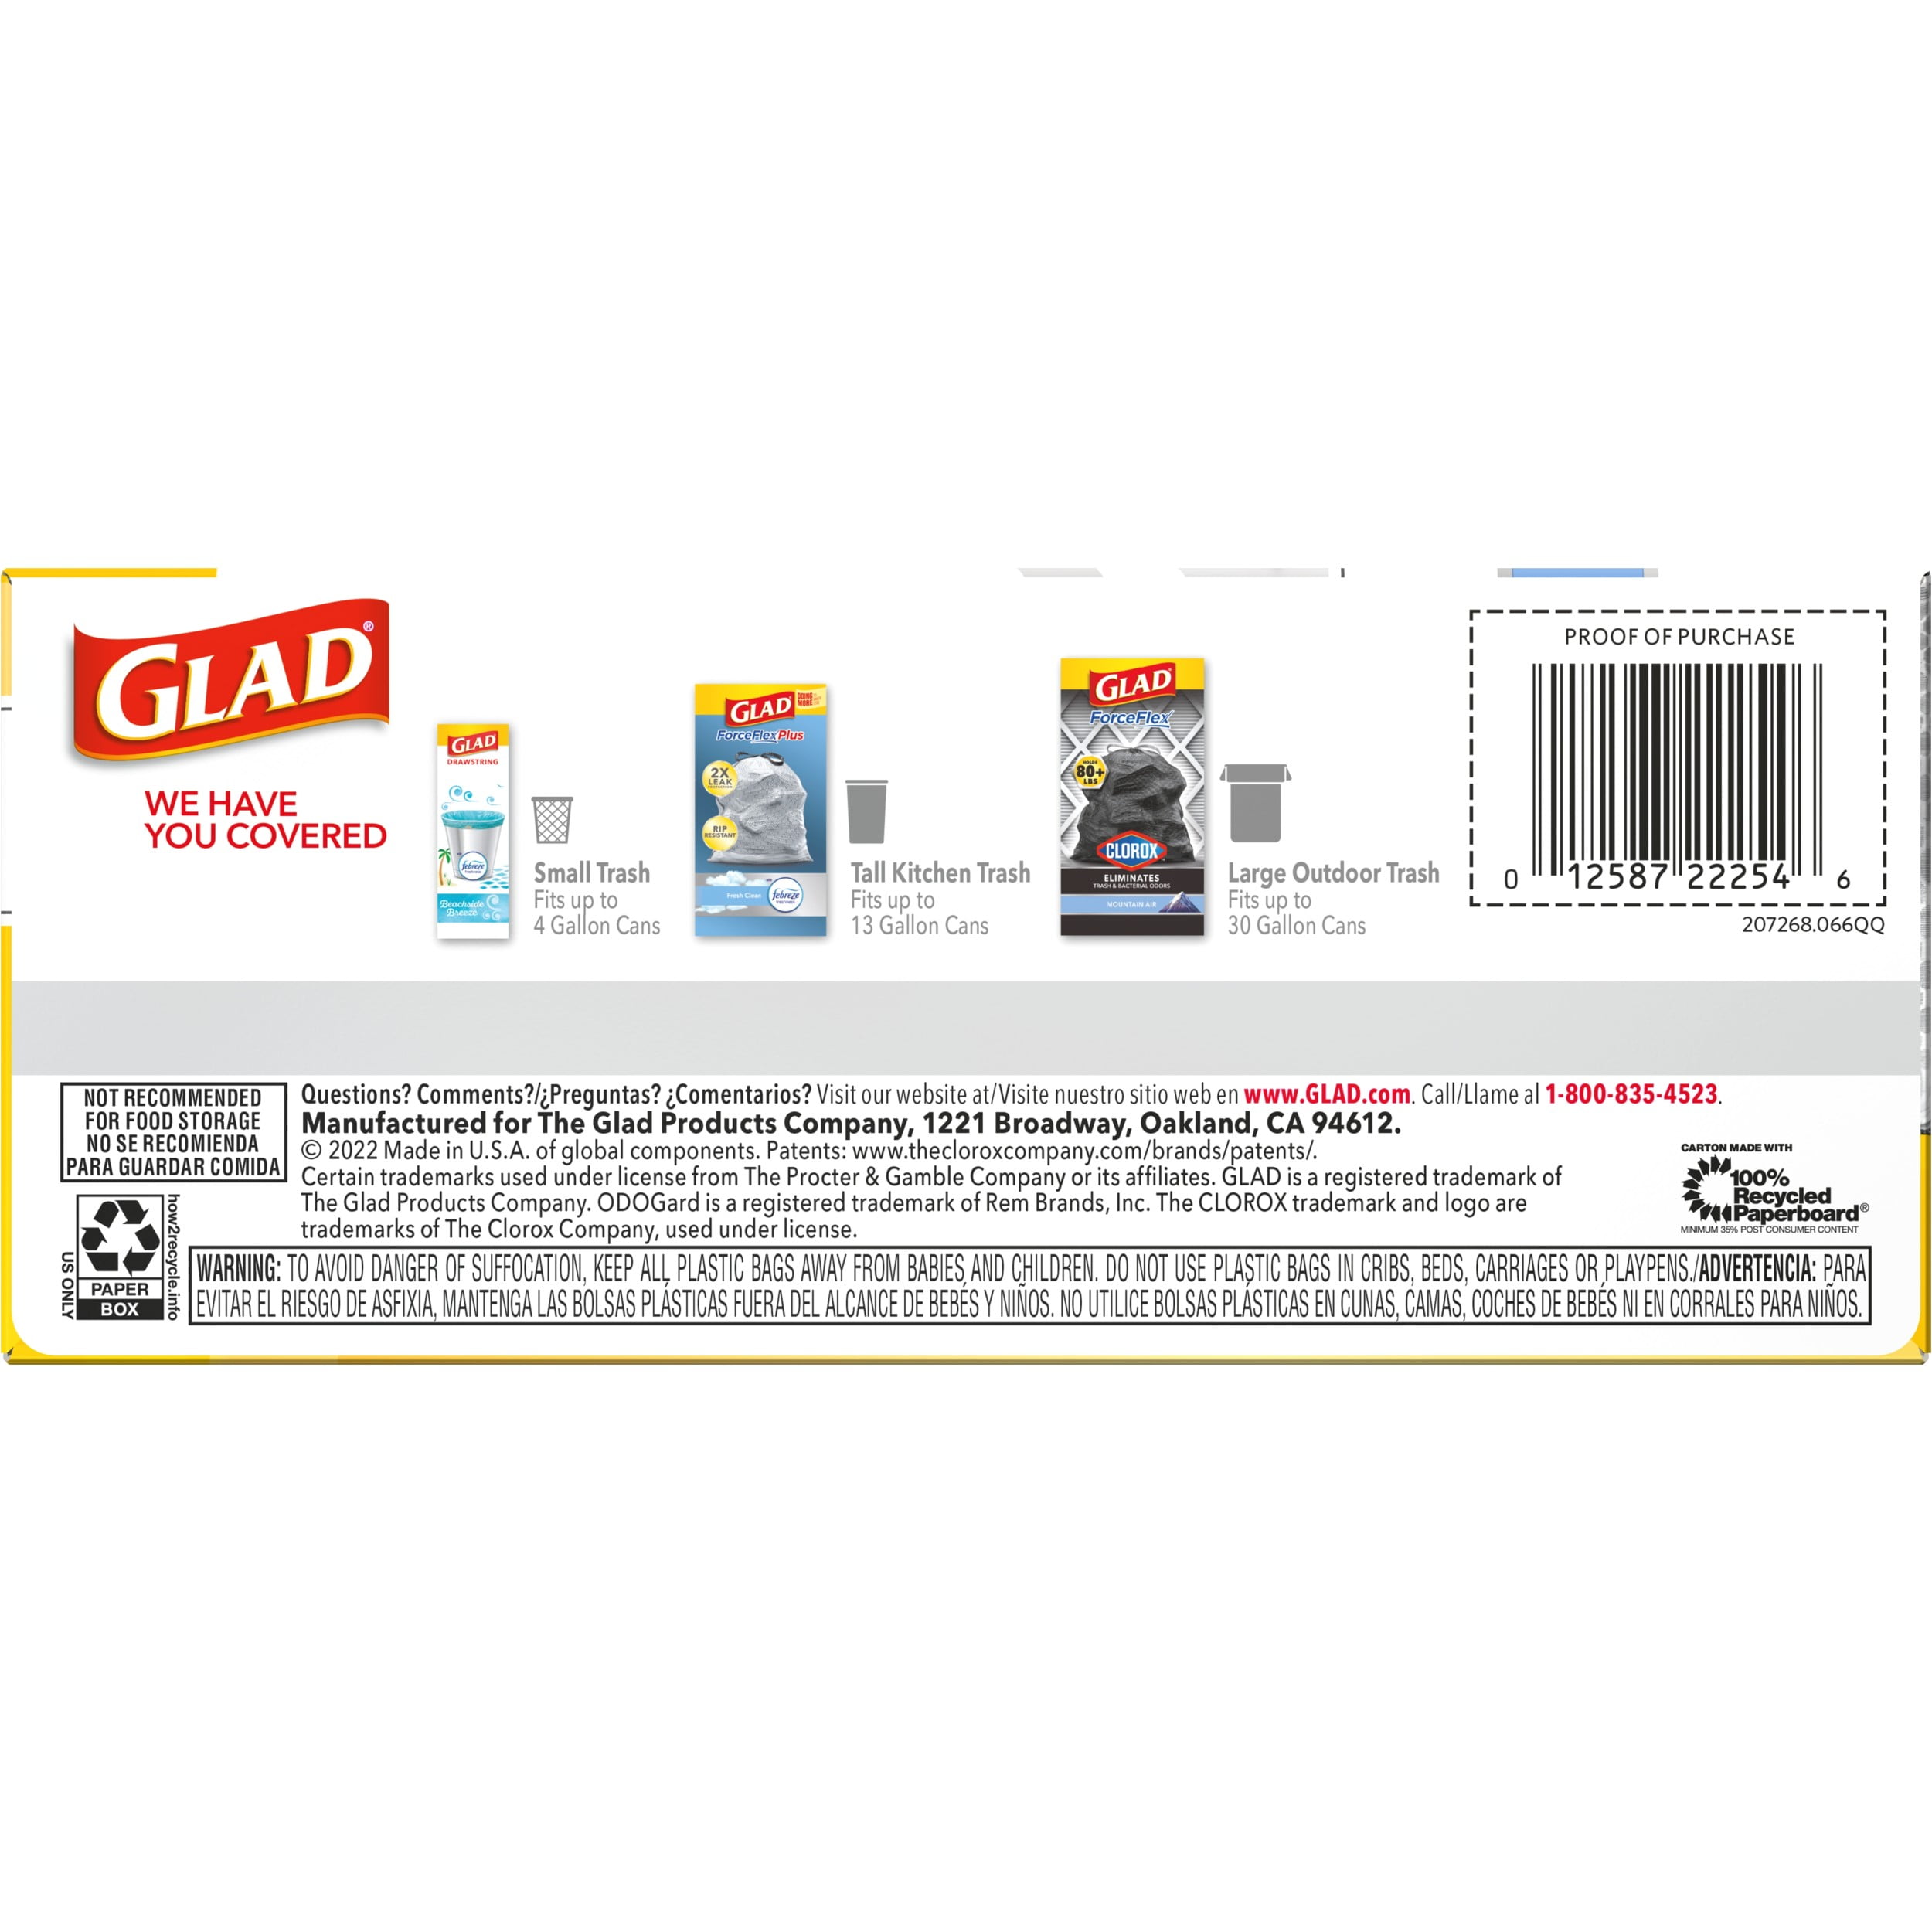 Glad ForceFlexPlus With Clorox Tall Kitchen Drawstring Trash Bags 13 Gallons  Lemon Fresh Bleach Scent Gray Pack Of 34 Bags - Office Depot